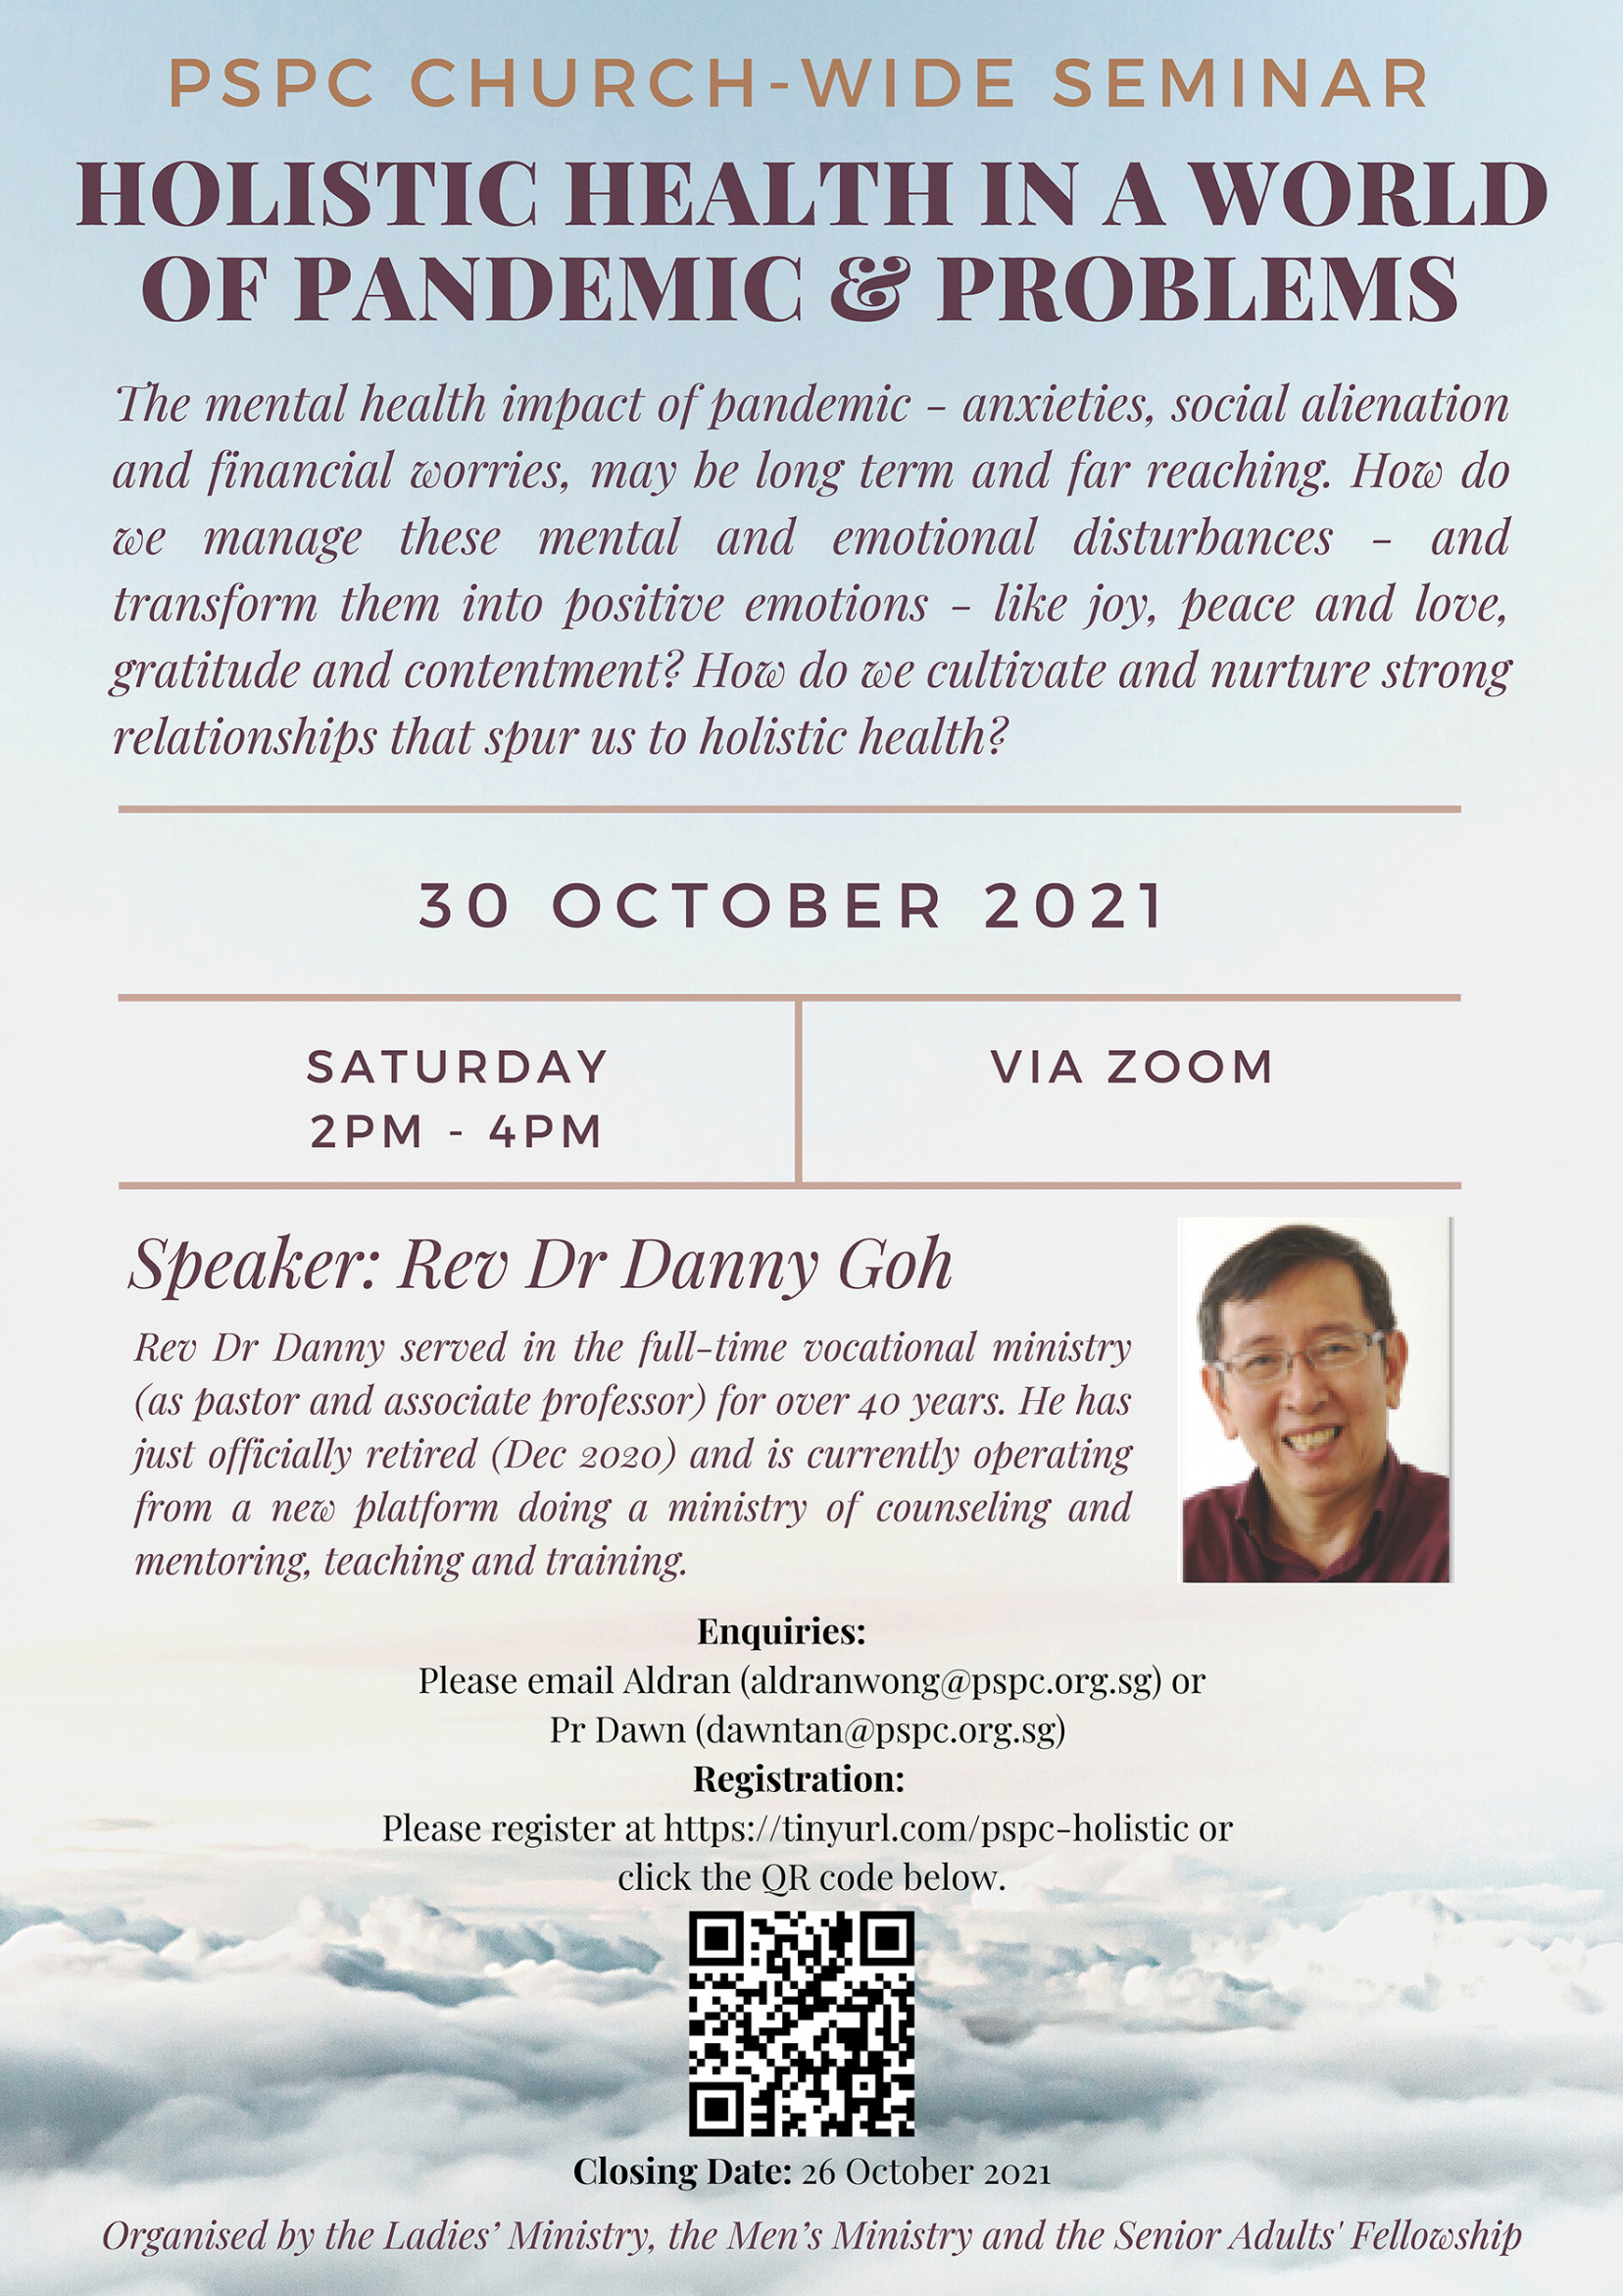 PSPC CHURCH-WIDE SEMINAR: Holistic Health in a World of Pandemic & Problems